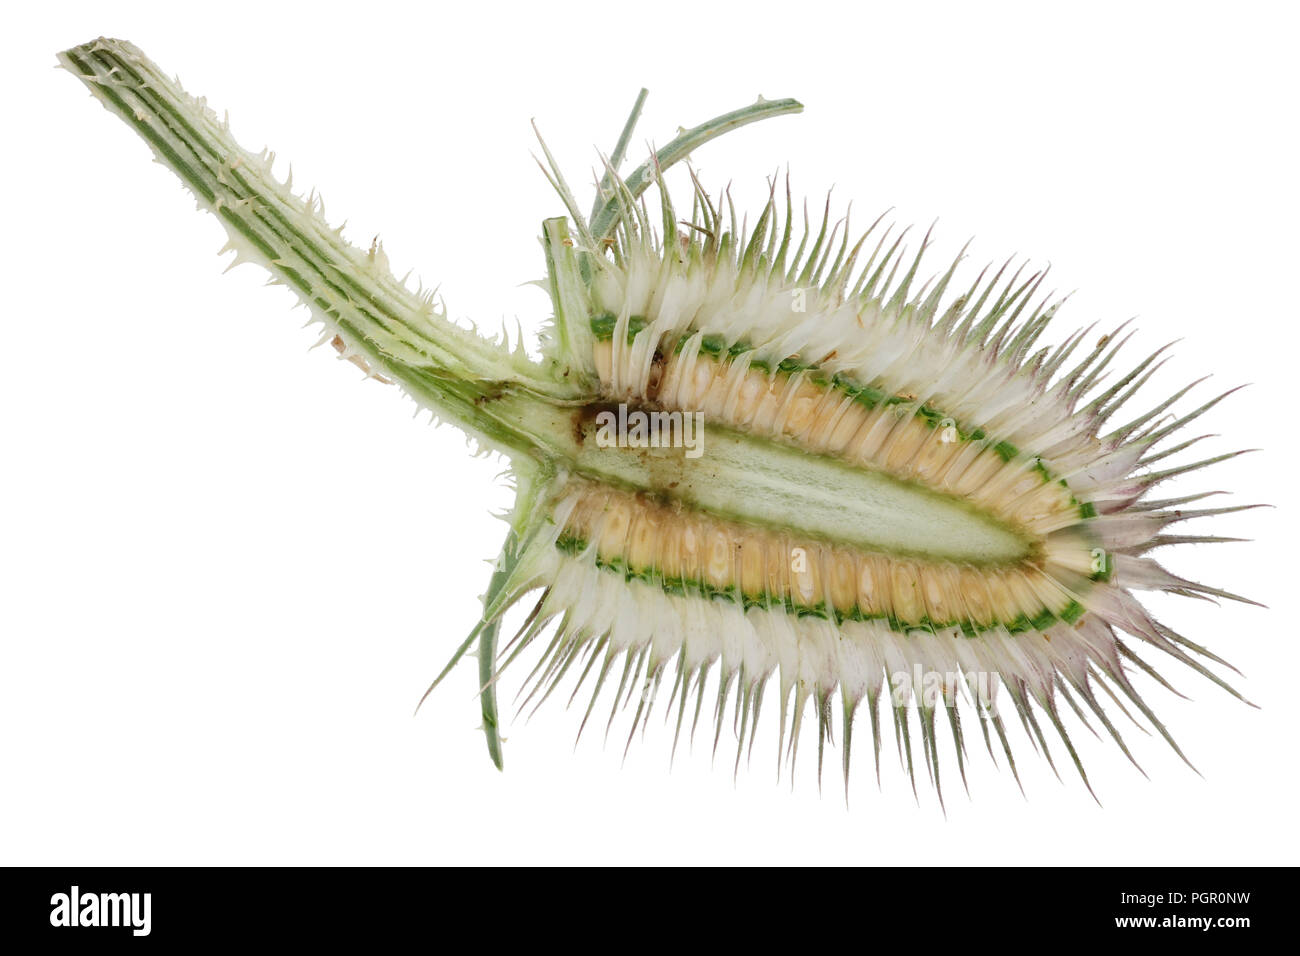 The spiny dry ripe bud of a thistle plant  with seeds is cut in half. Isolated on white studio macro shot Stock Photo